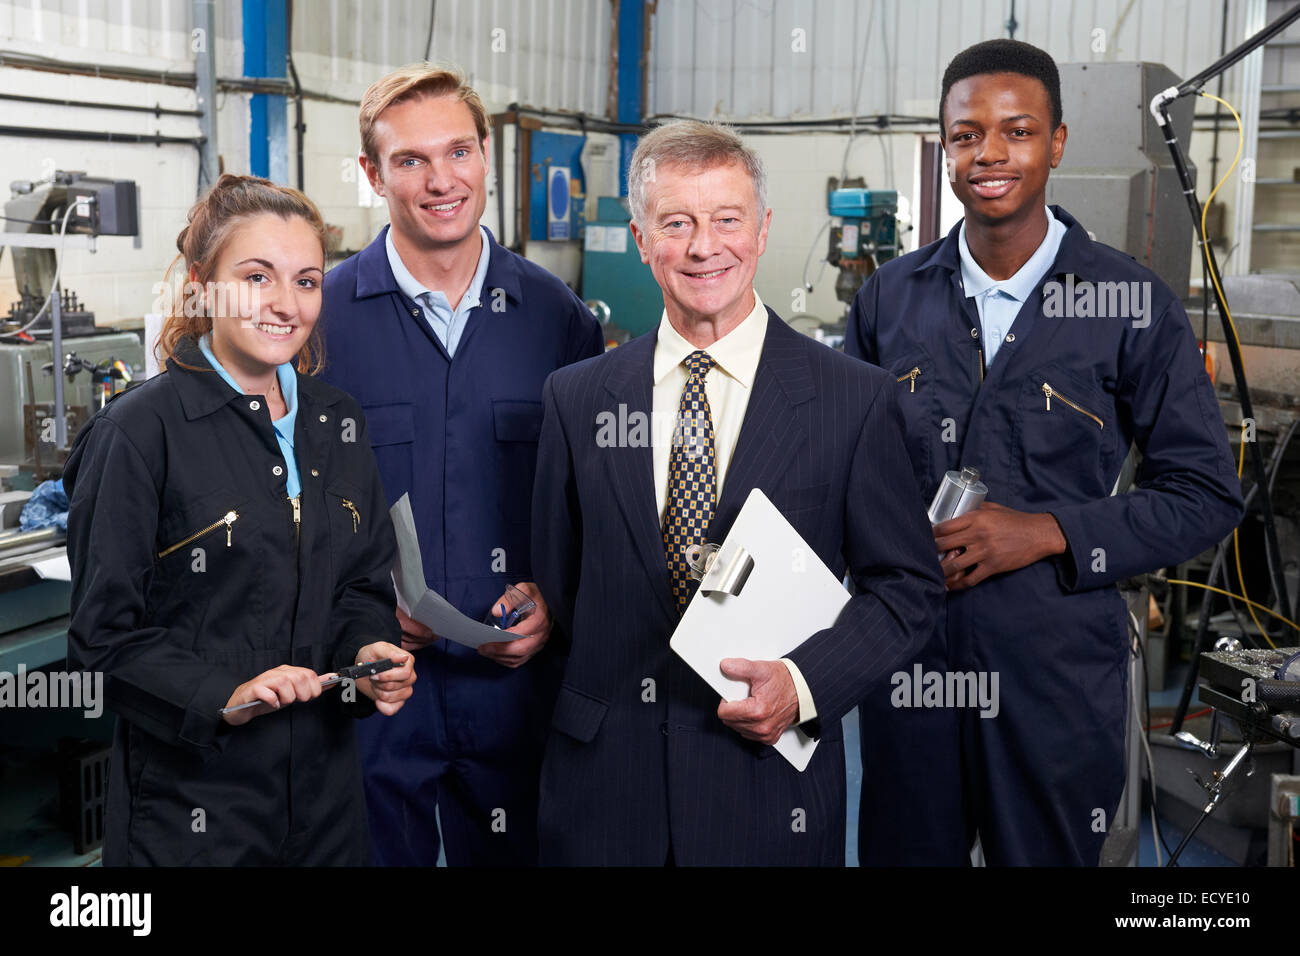 Portrait Of Manager And Staff In Engineering Factory Stock Photo